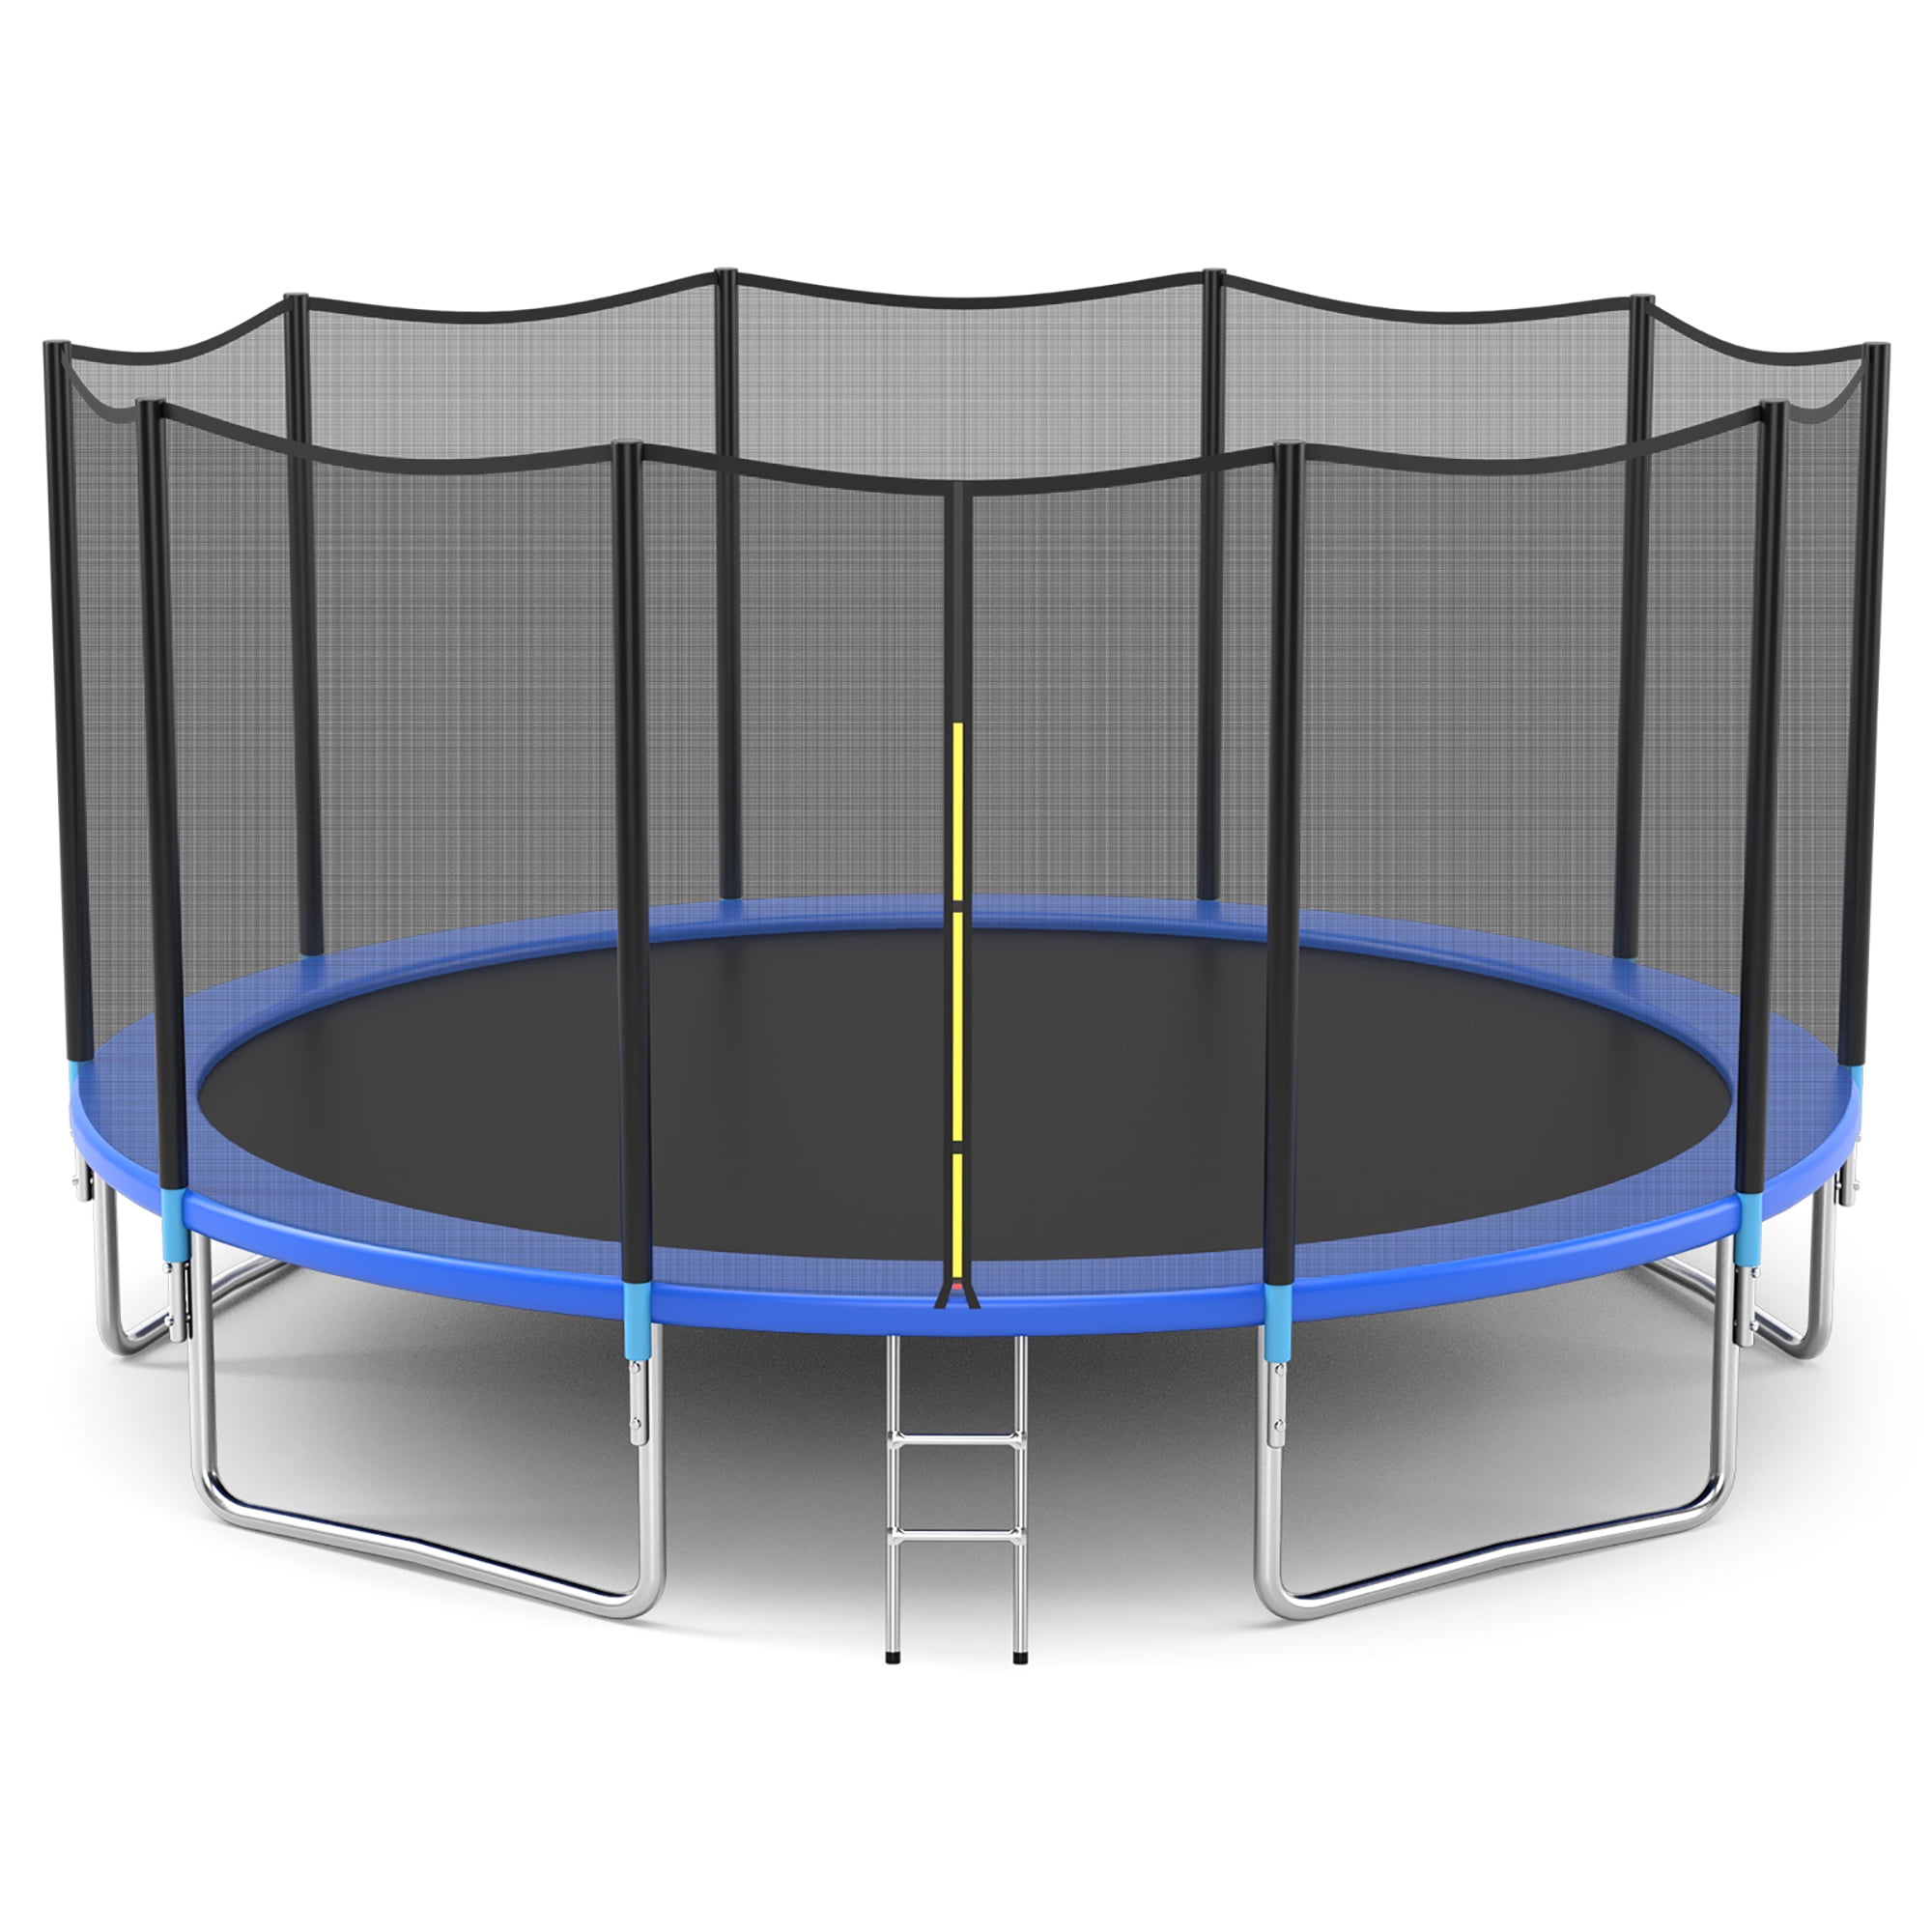 Goplus 15FT Combo Bounce Jump Trampoline W/Safety Enclosure Net&Spring Pad Ladder